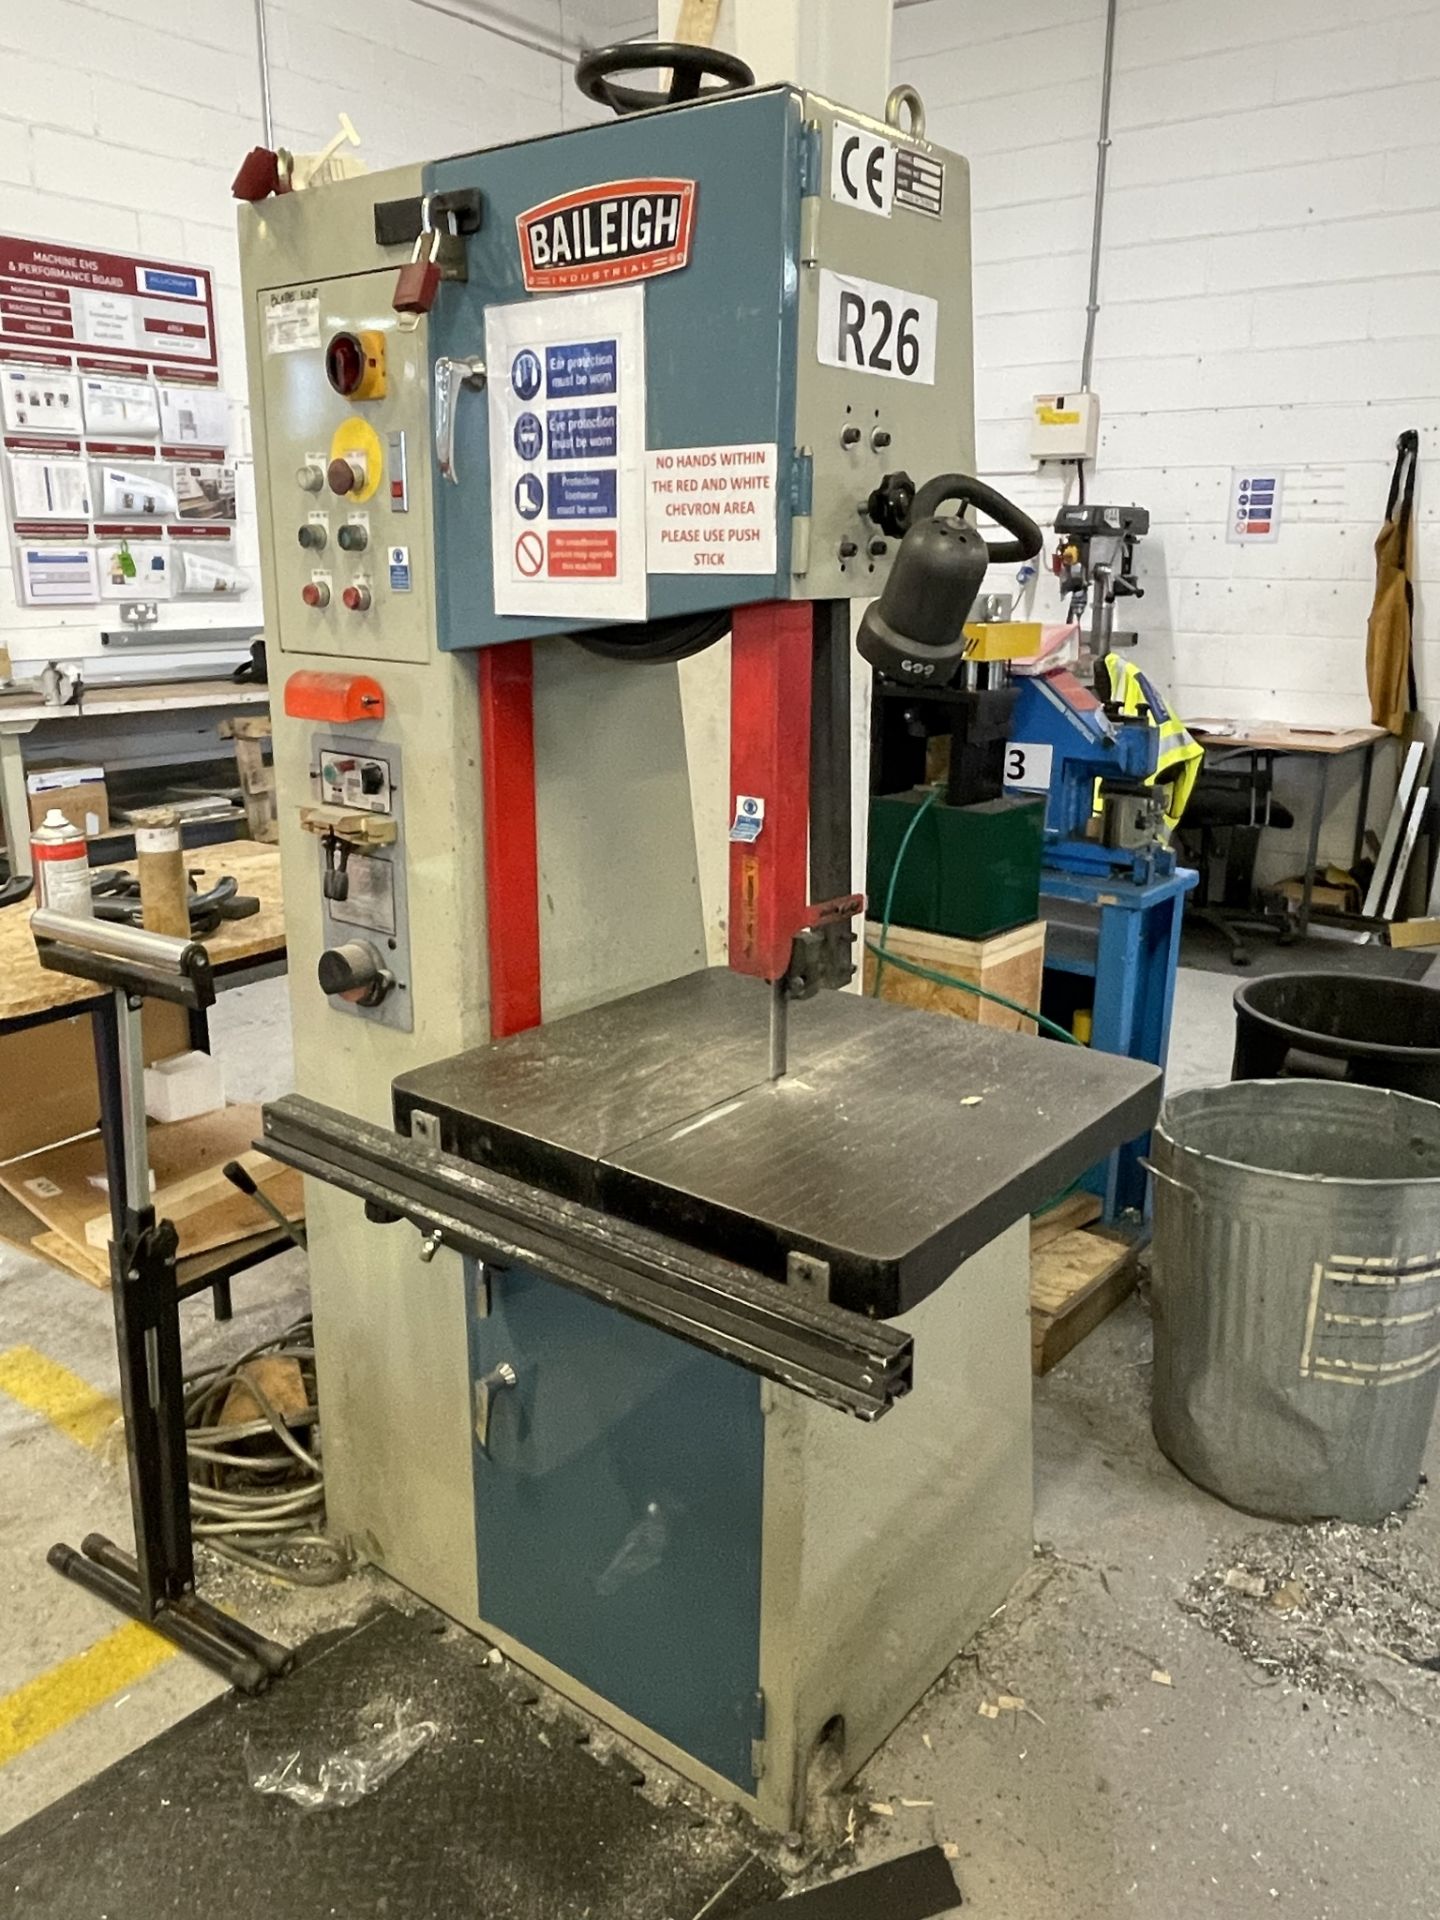 Baileigh Industrial, BSV-16 vertical bandsaw, throat: 40mm, Serial No. 144105 (DOM: 2014) with blade